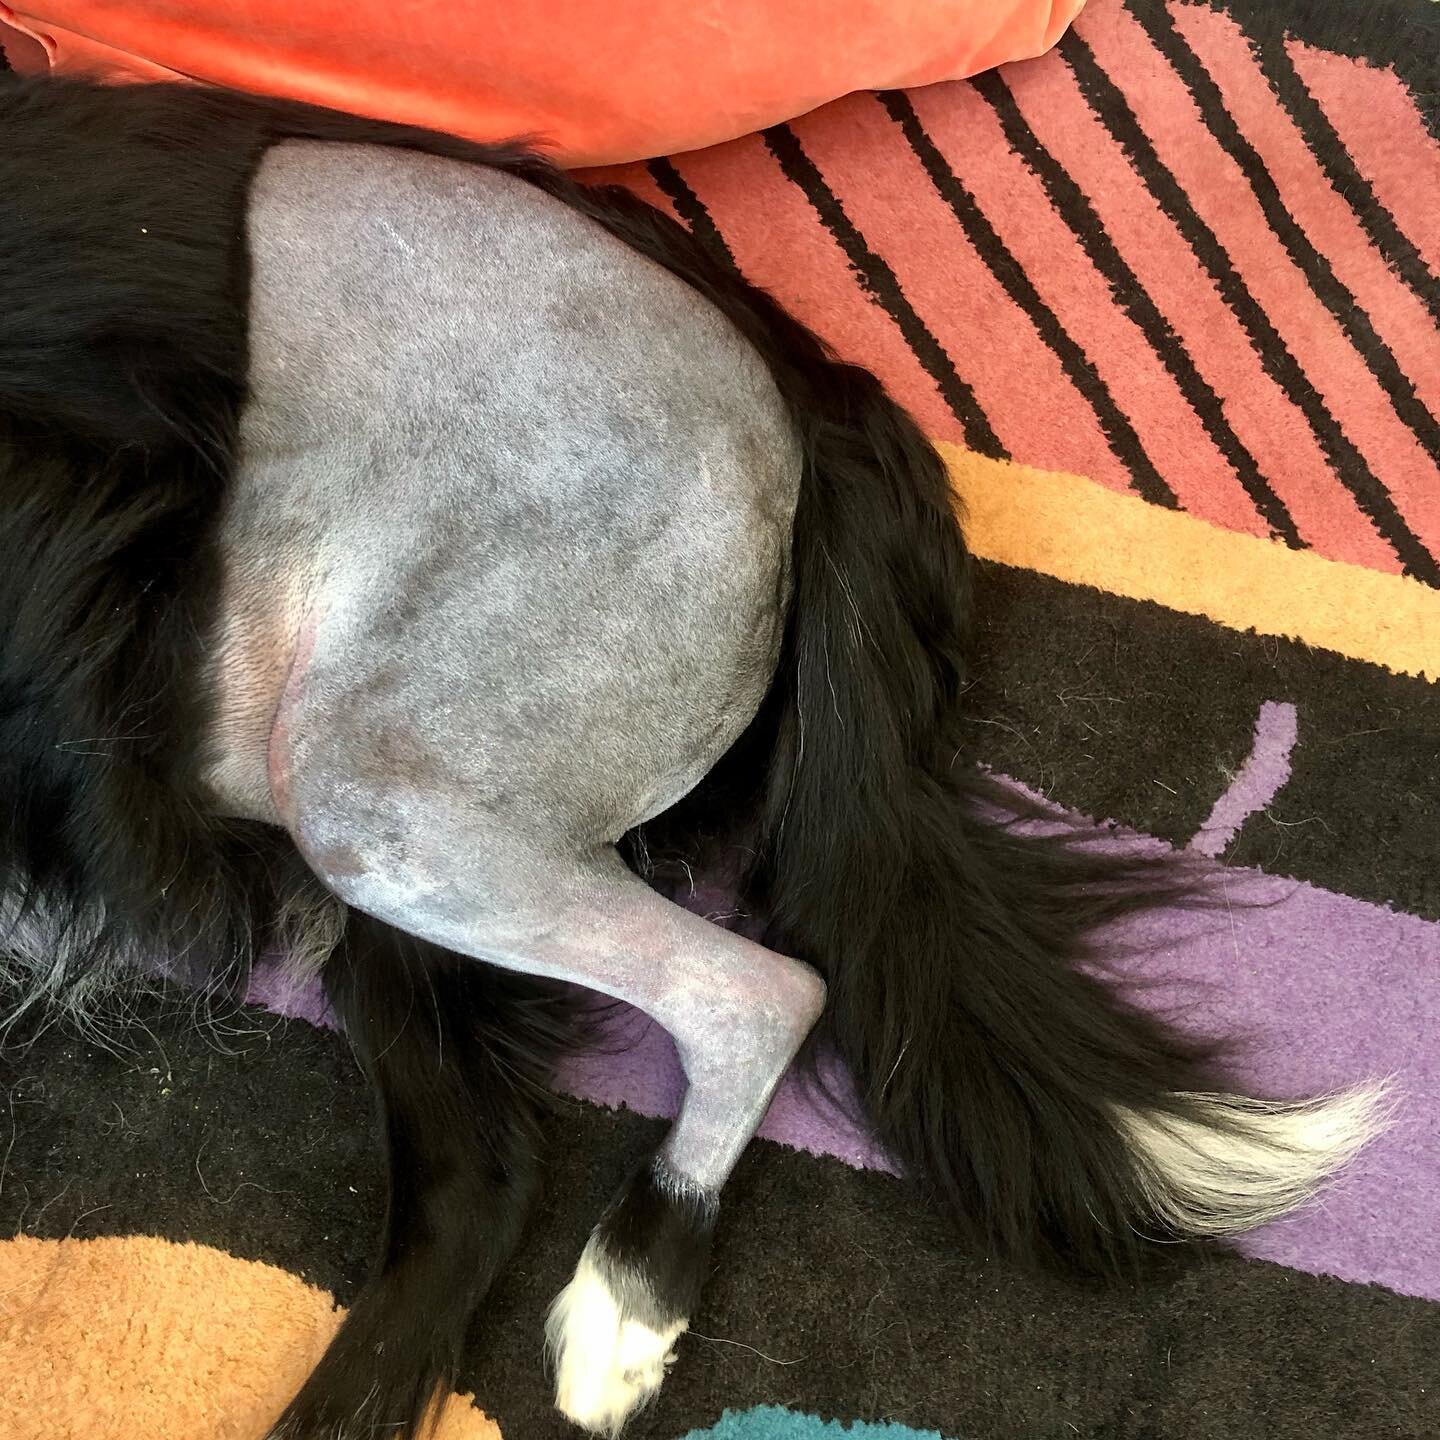 28 Dogs Later. Jesse is home and attempting an uncomfortable rest with a new haircut, an Elizabethan collar, and a line of stitches that Frankenstein&rsquo;s monster&rsquo;d envy.

It&rsquo;s gonna be a long 8 weeks, but we&rsquo;re grateful he&rsquo